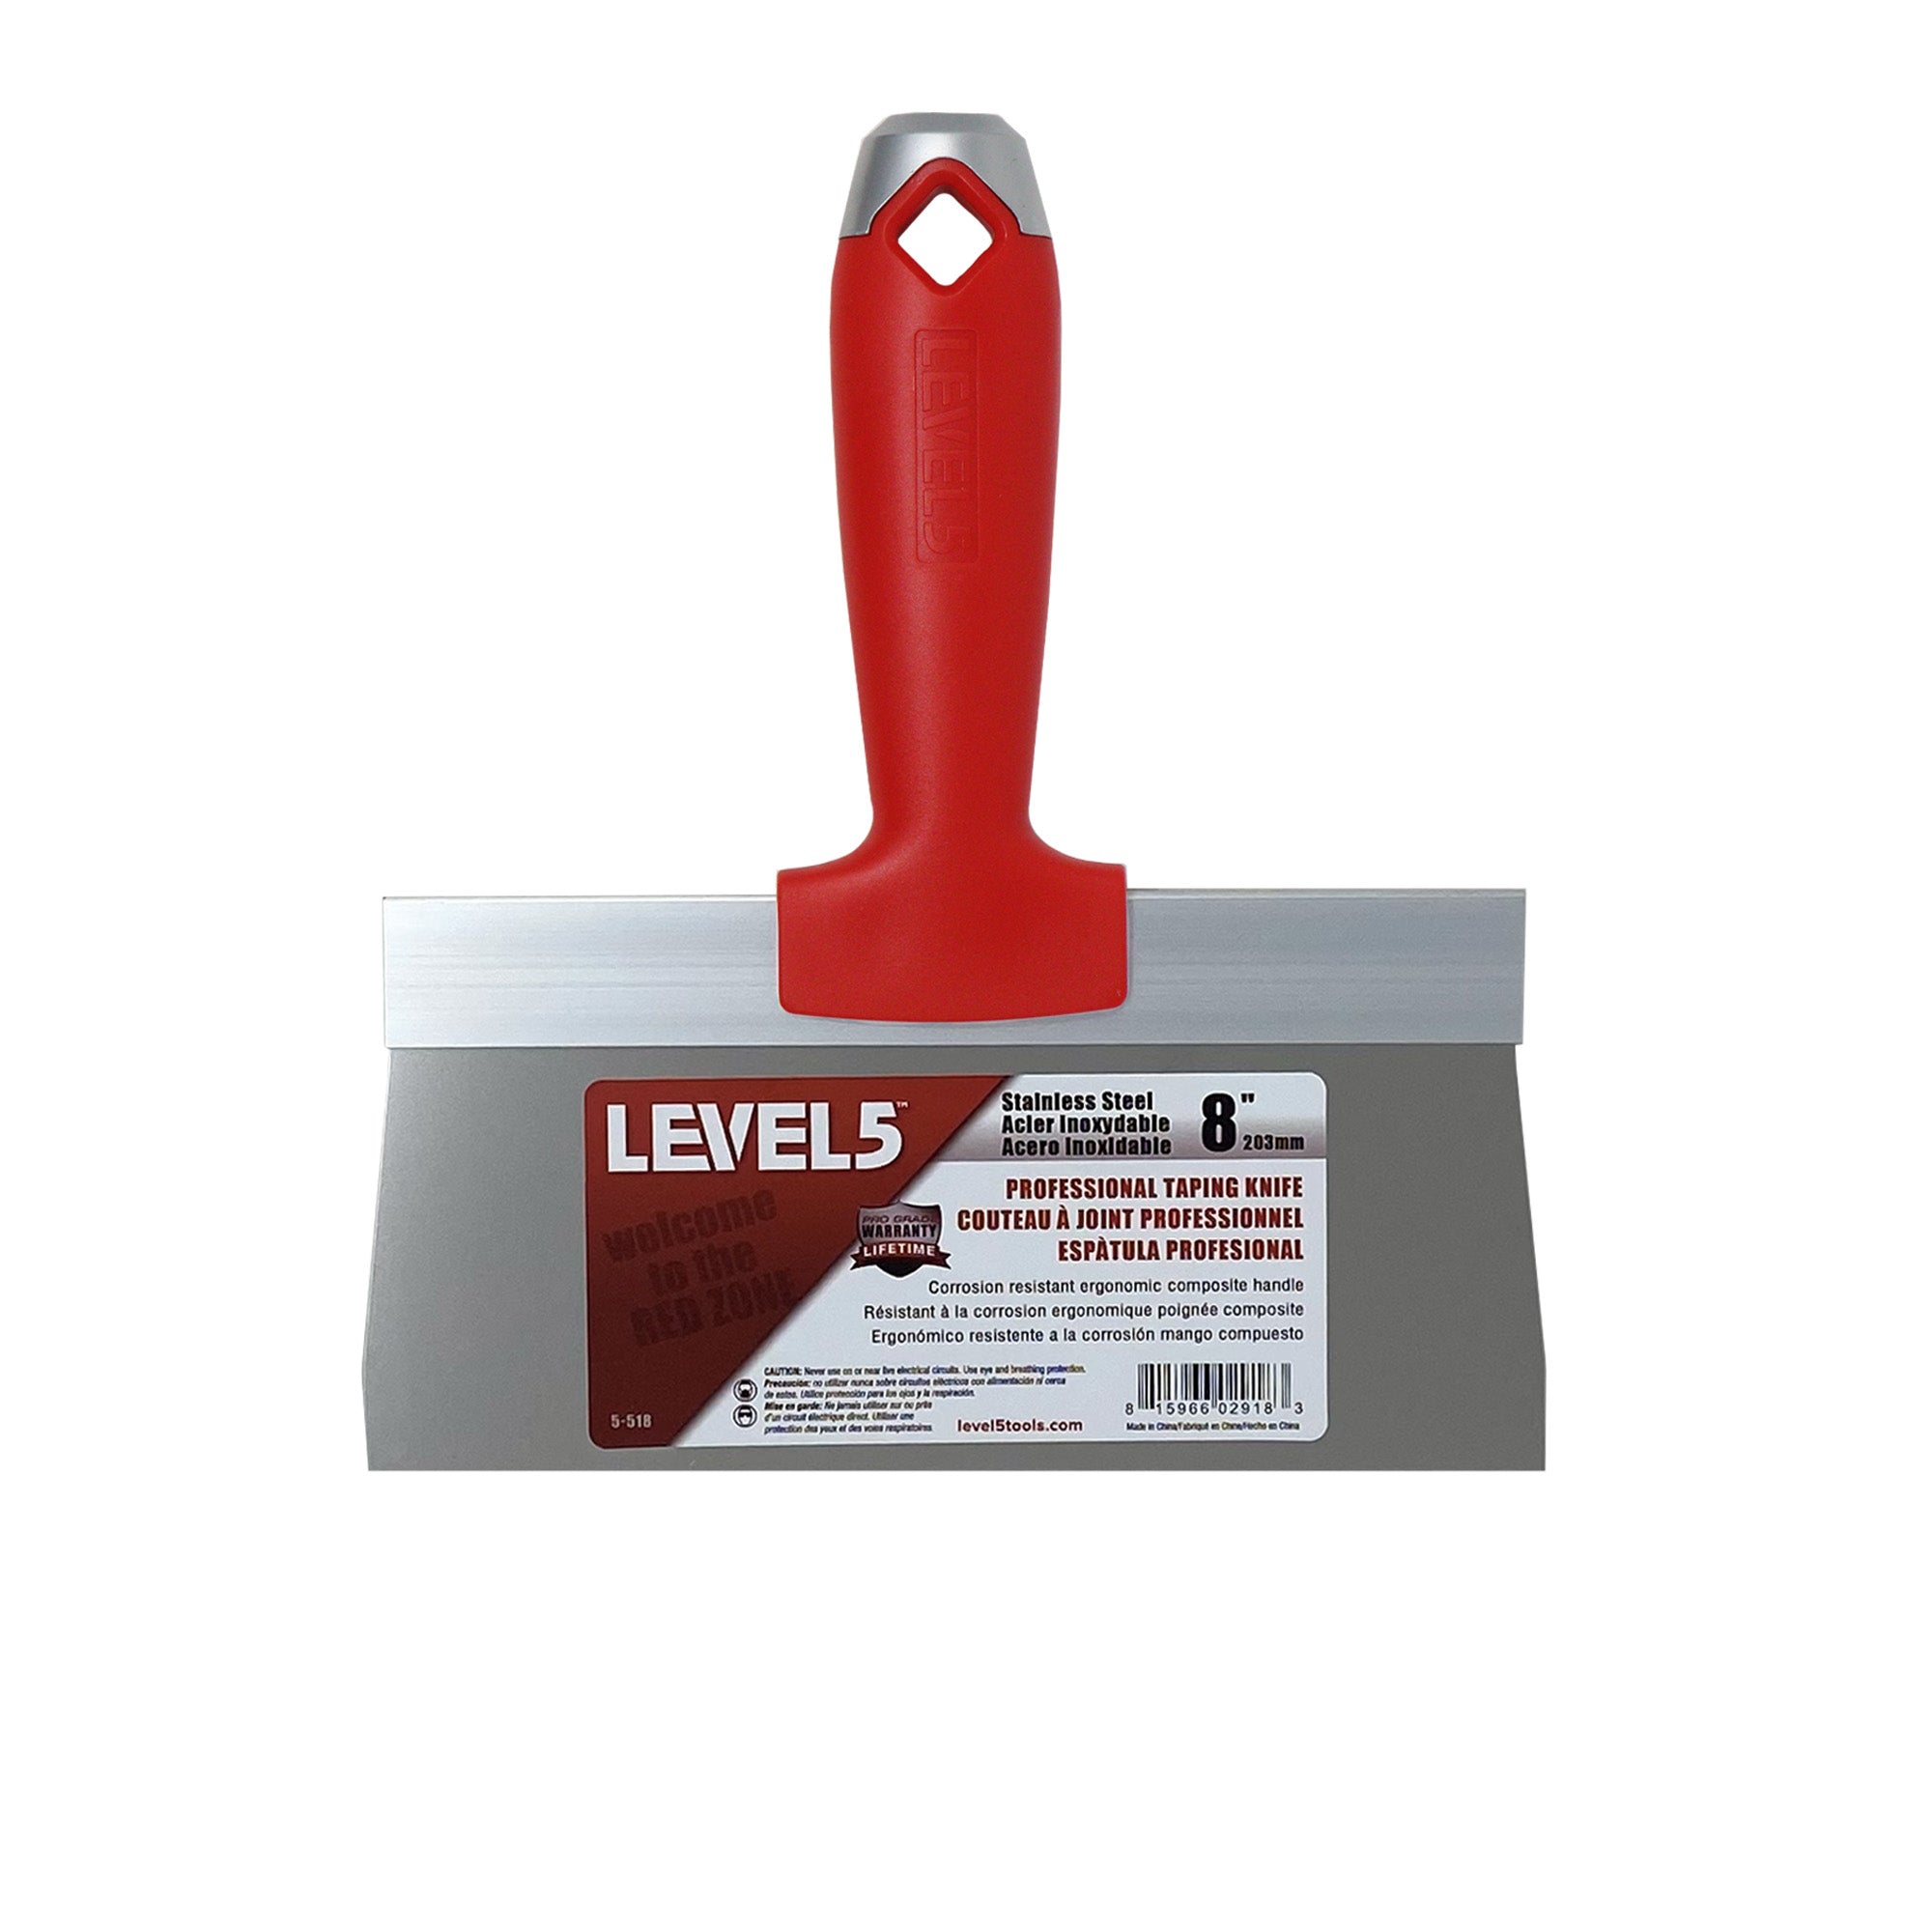 Level 5 Stainless Steel Taping Knife - Composite Handle 8" | 5-518